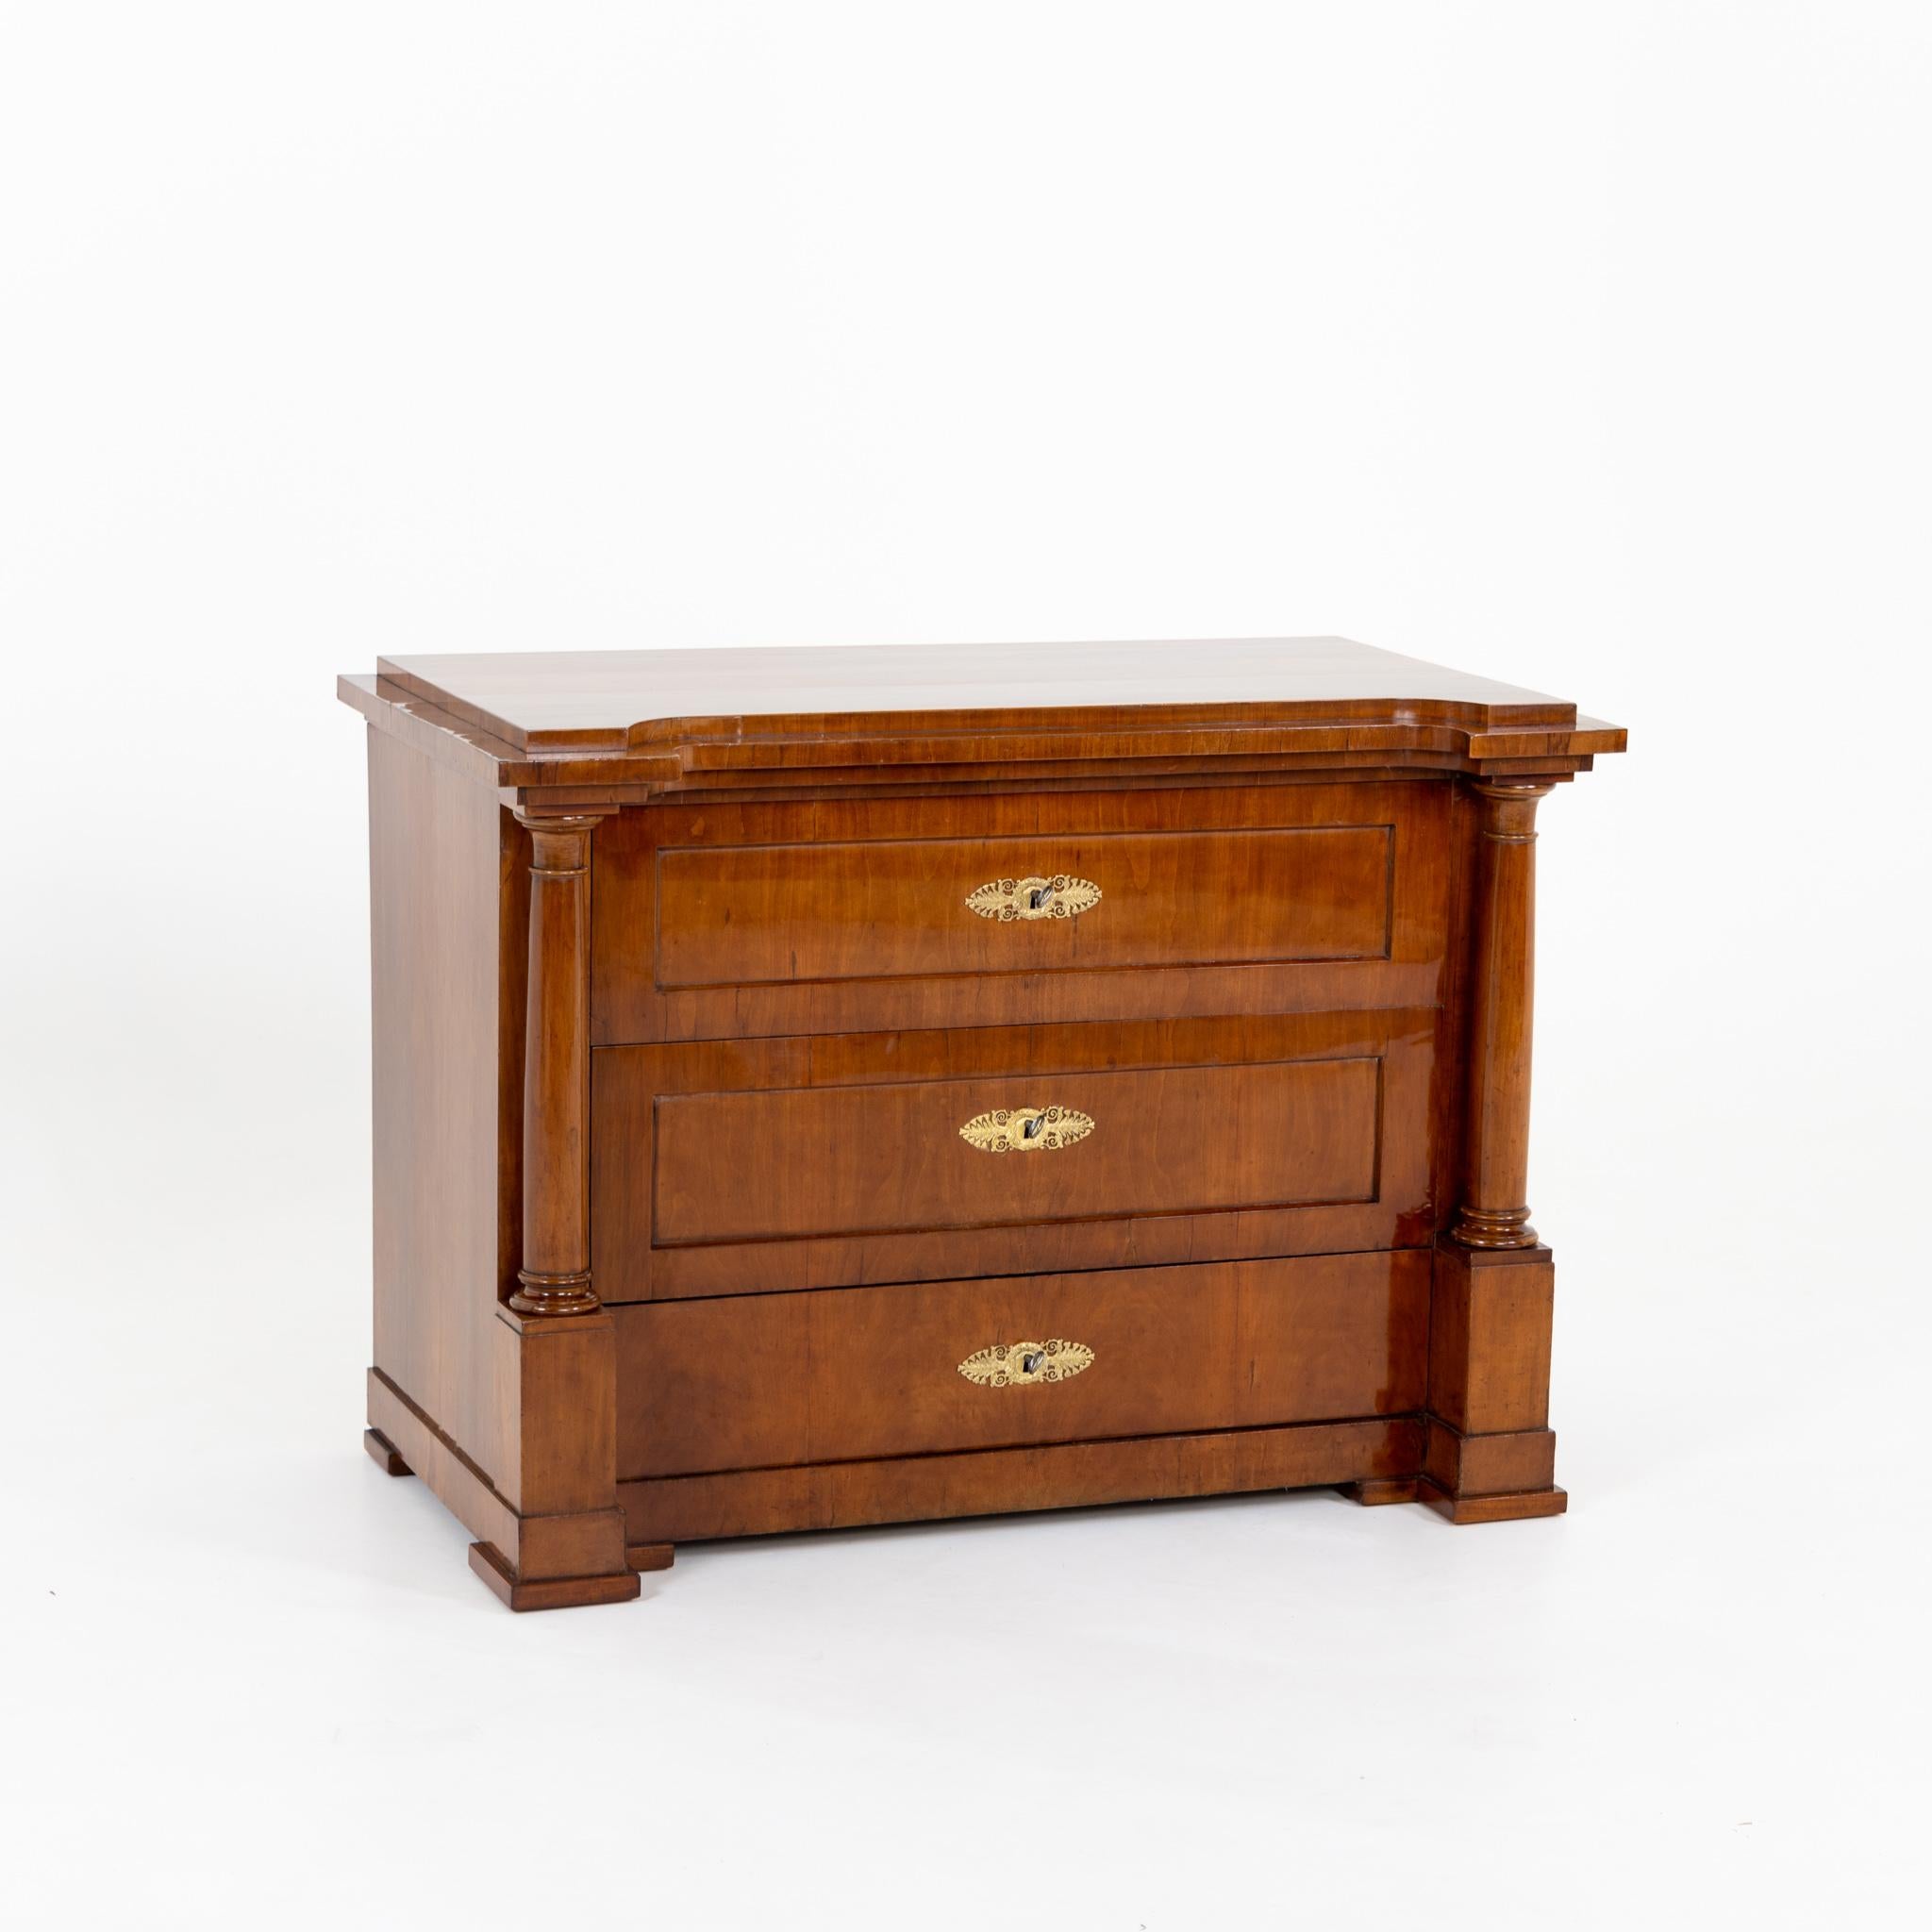 Biedermeier commode with three drawers and flanking full columns, veneered in mahogany.